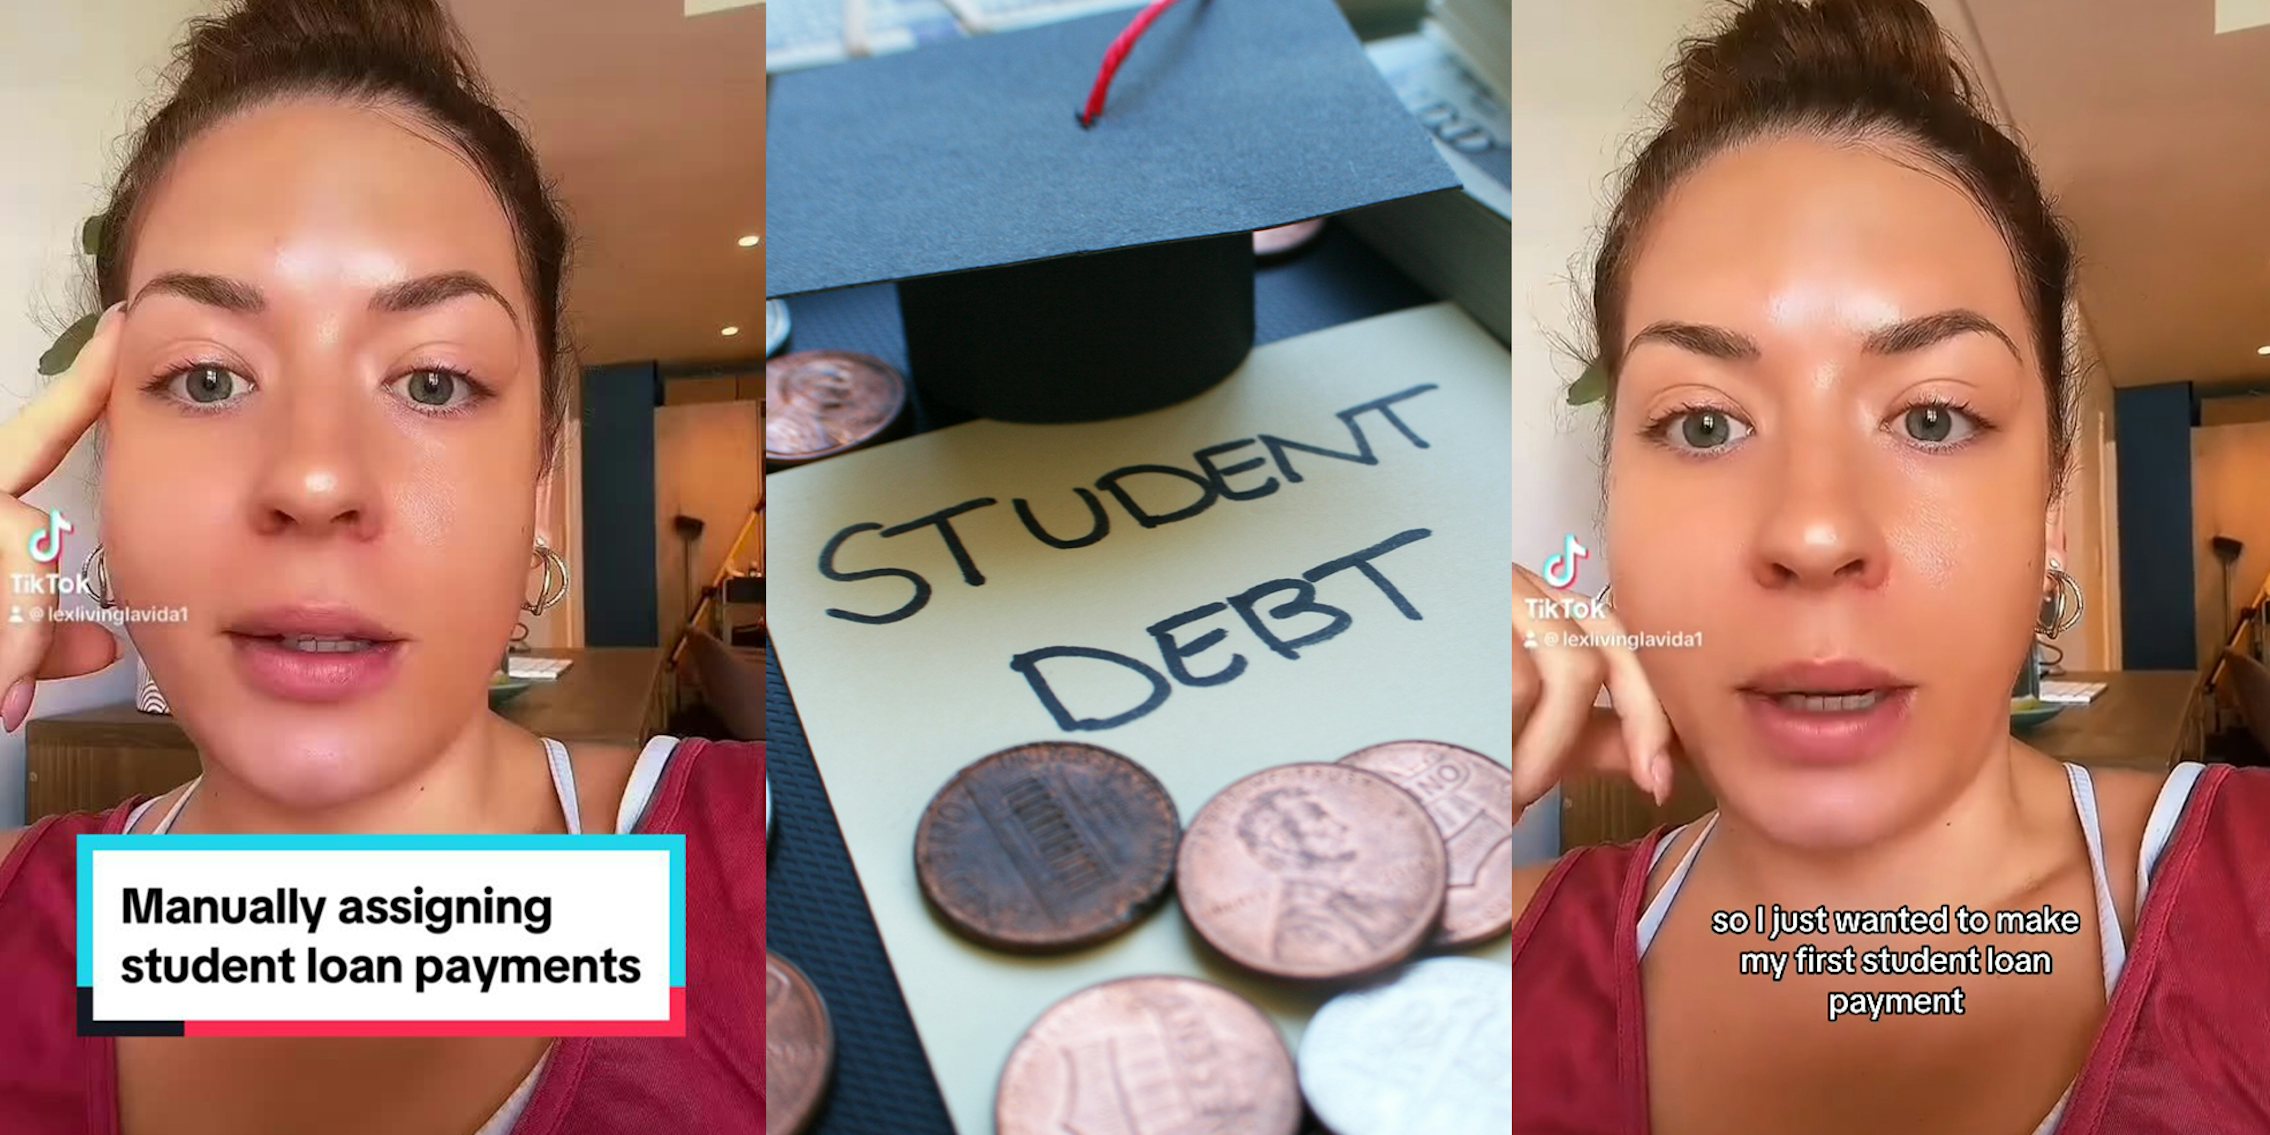 Woman shares student loan payment hack as payments resume